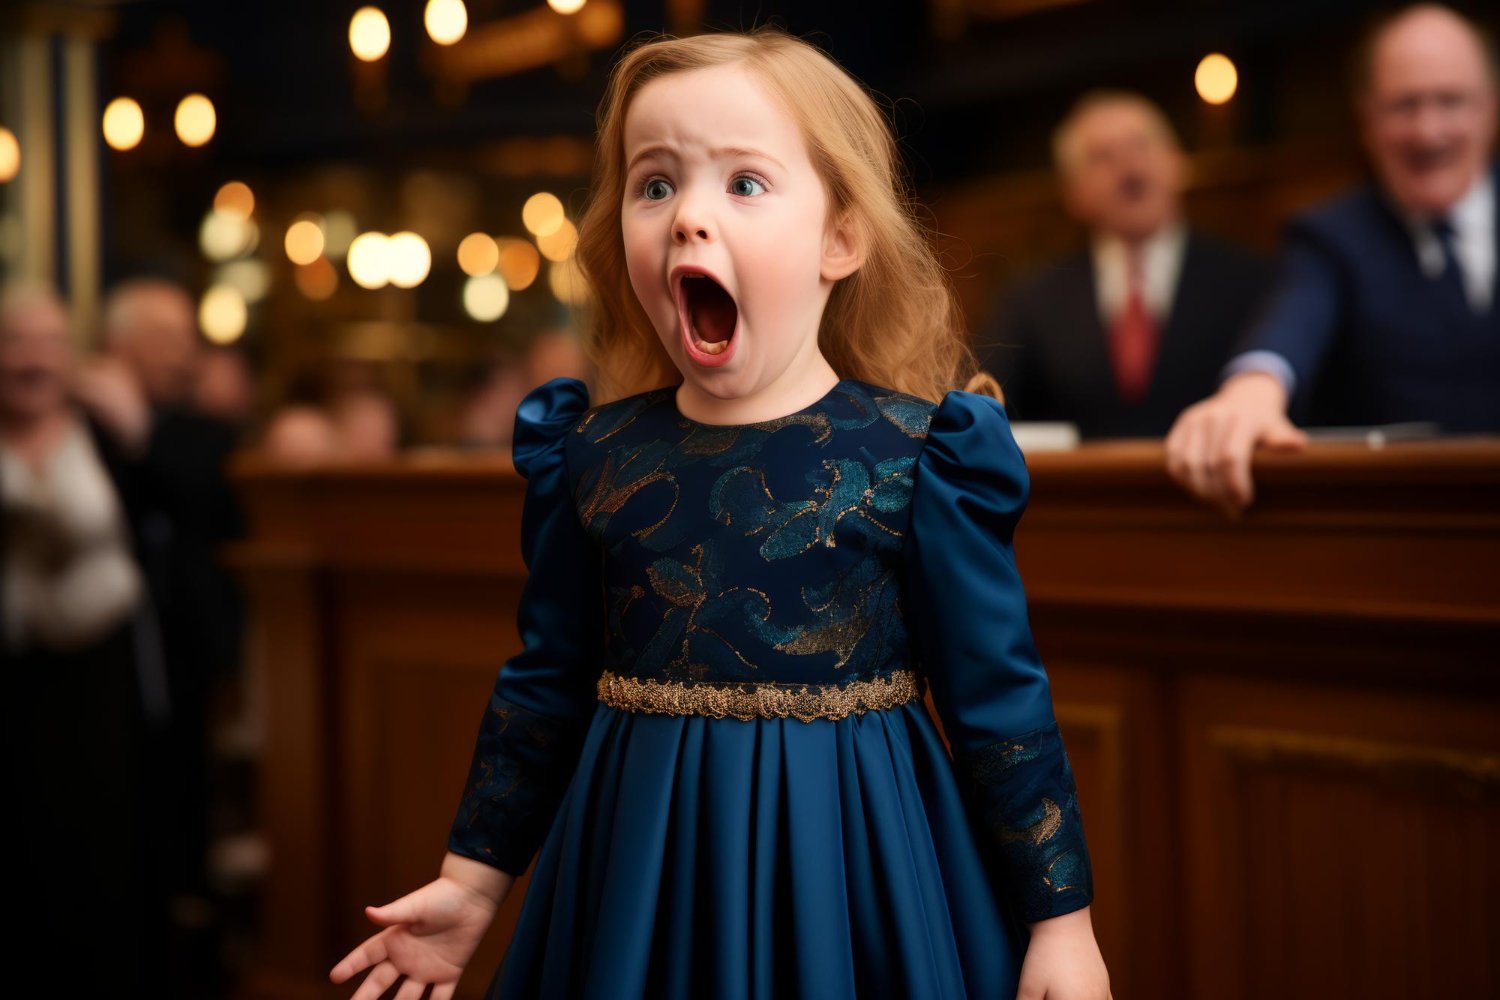 A little girl in a blue dress with her mouth open